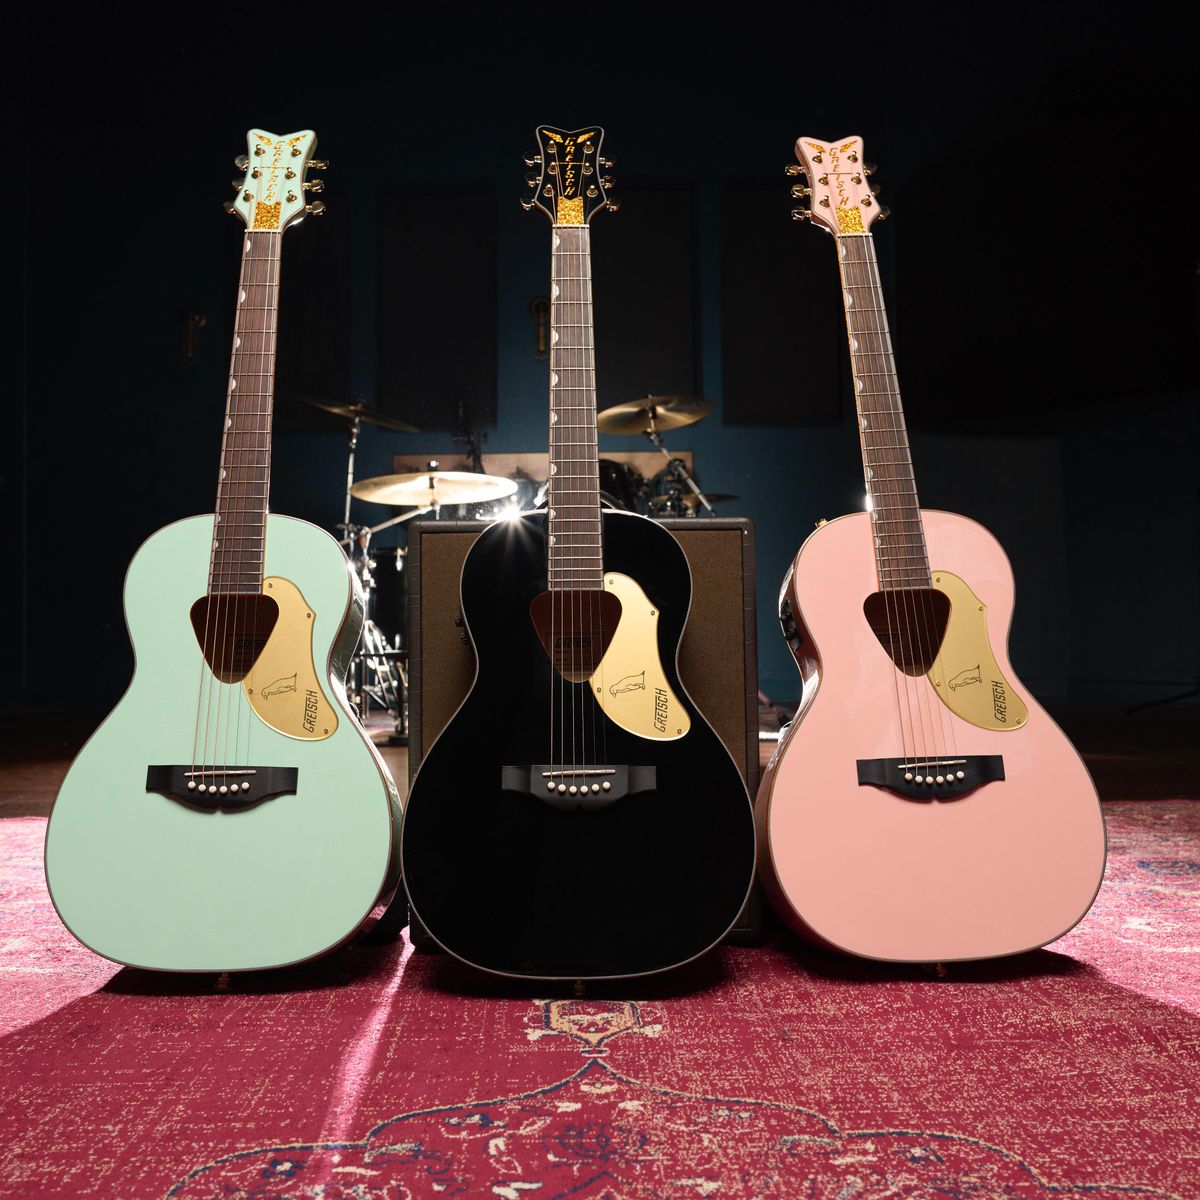 Gretsch Launches the Revamped G5201E Rancher Penguin Parlors​